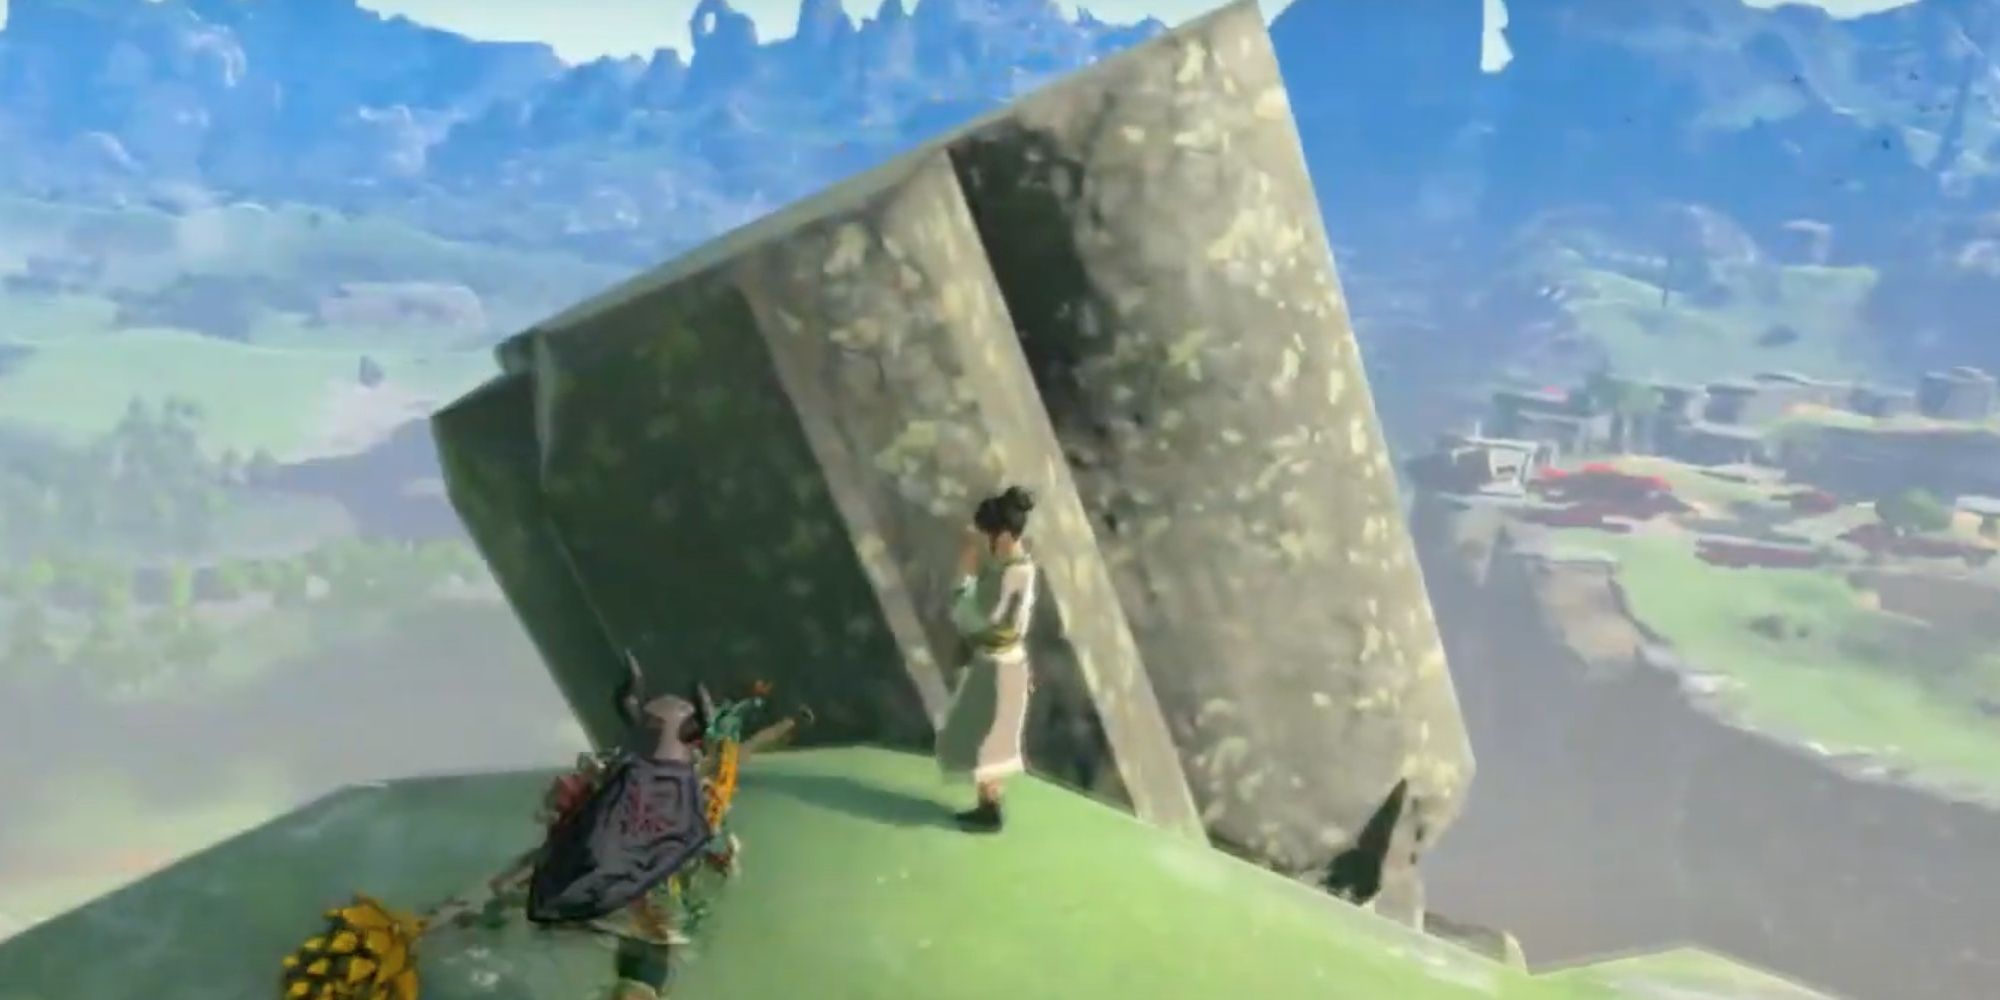 Link discovers a beckoning woman on a cliff in 